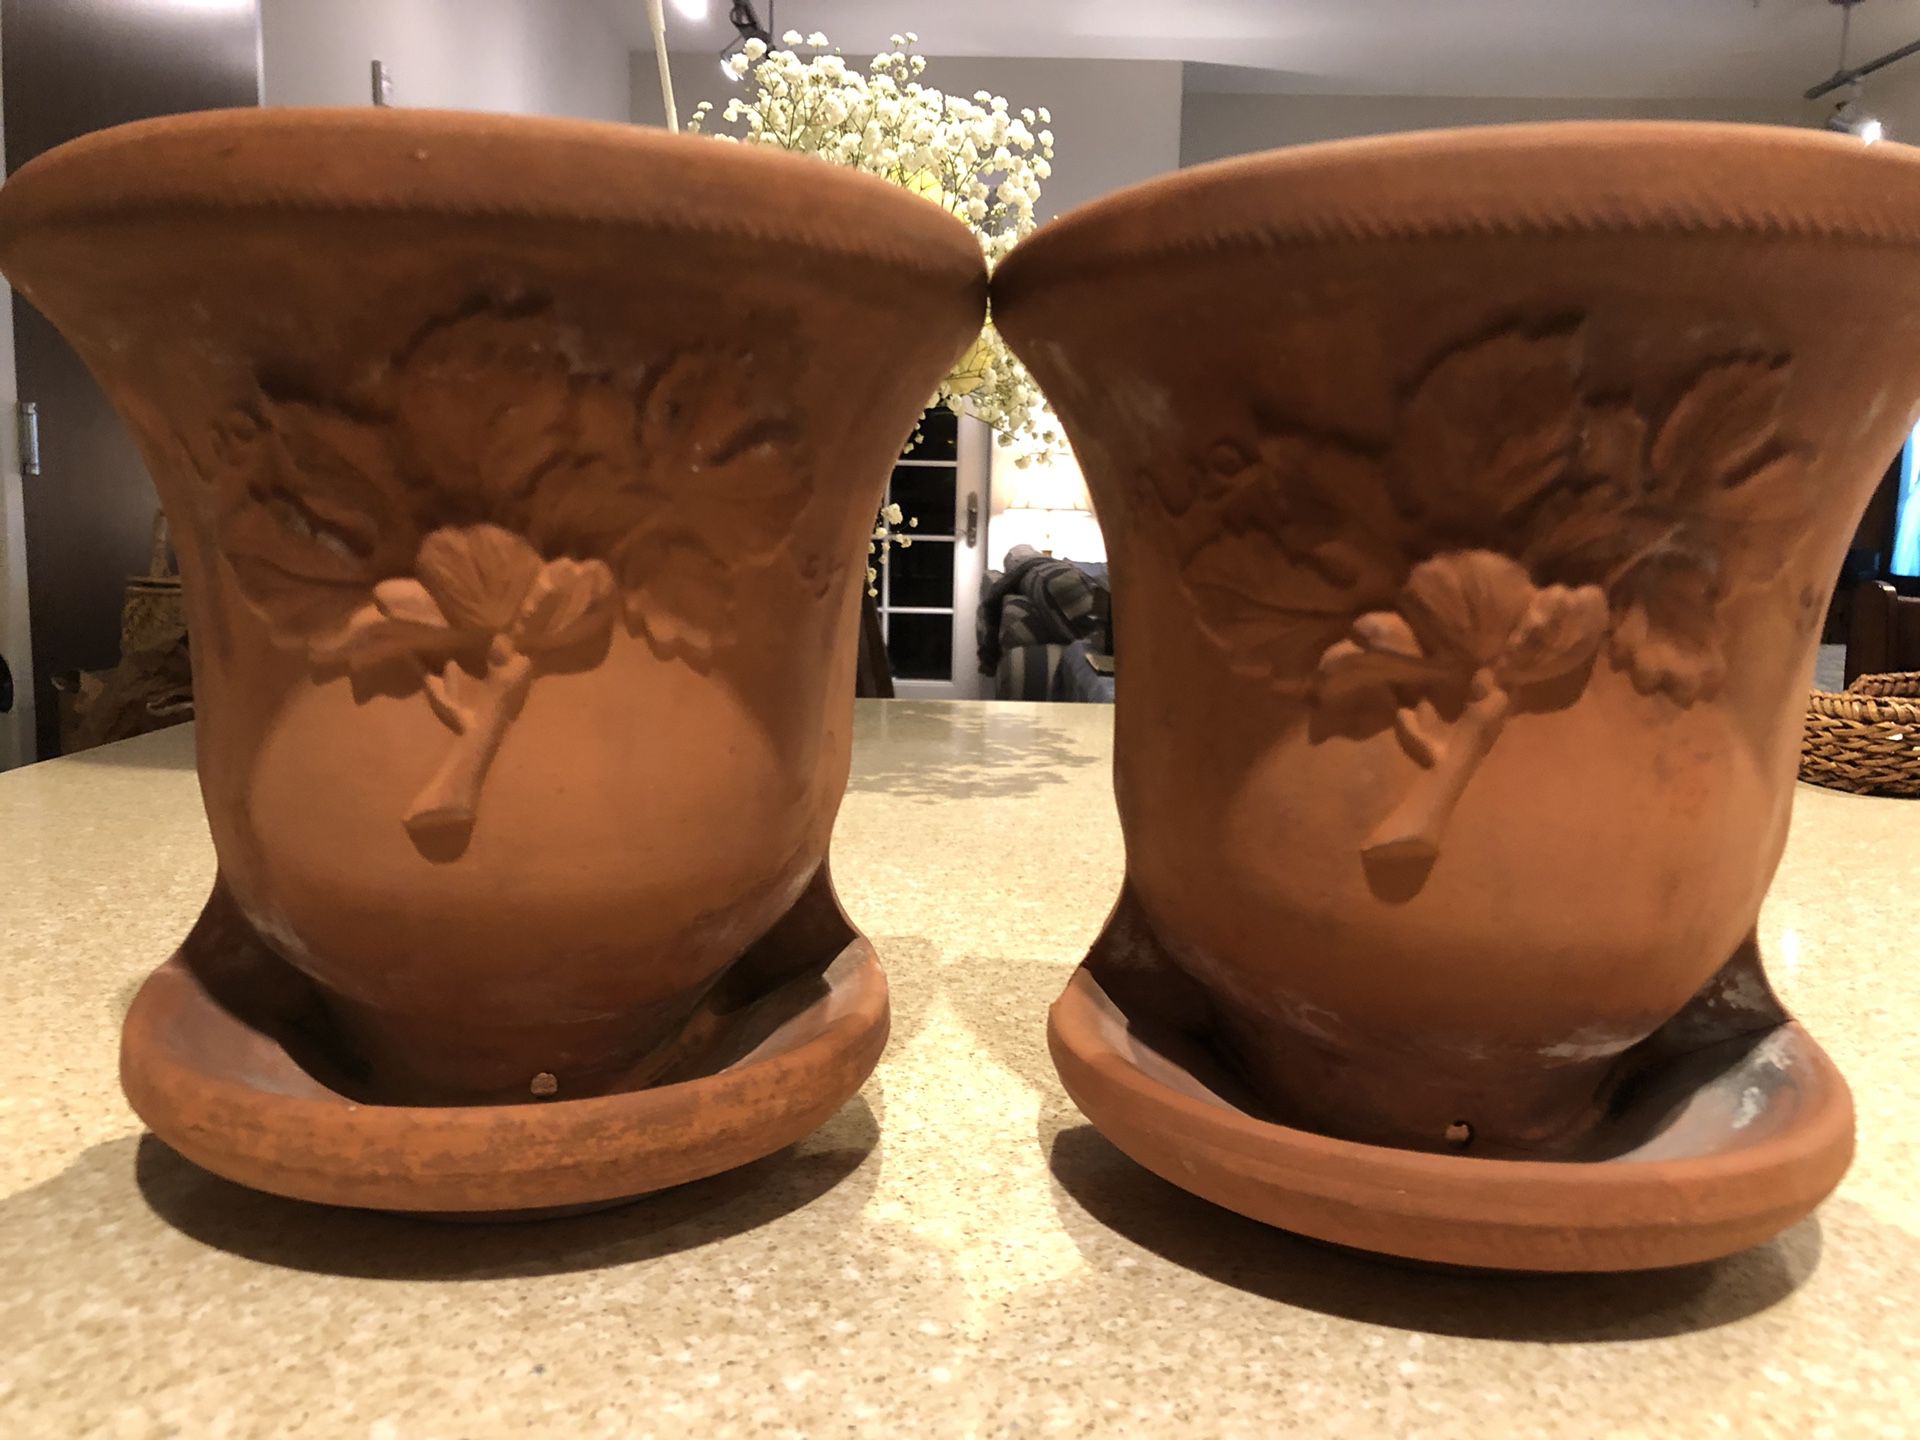 2 clay flower vases from France